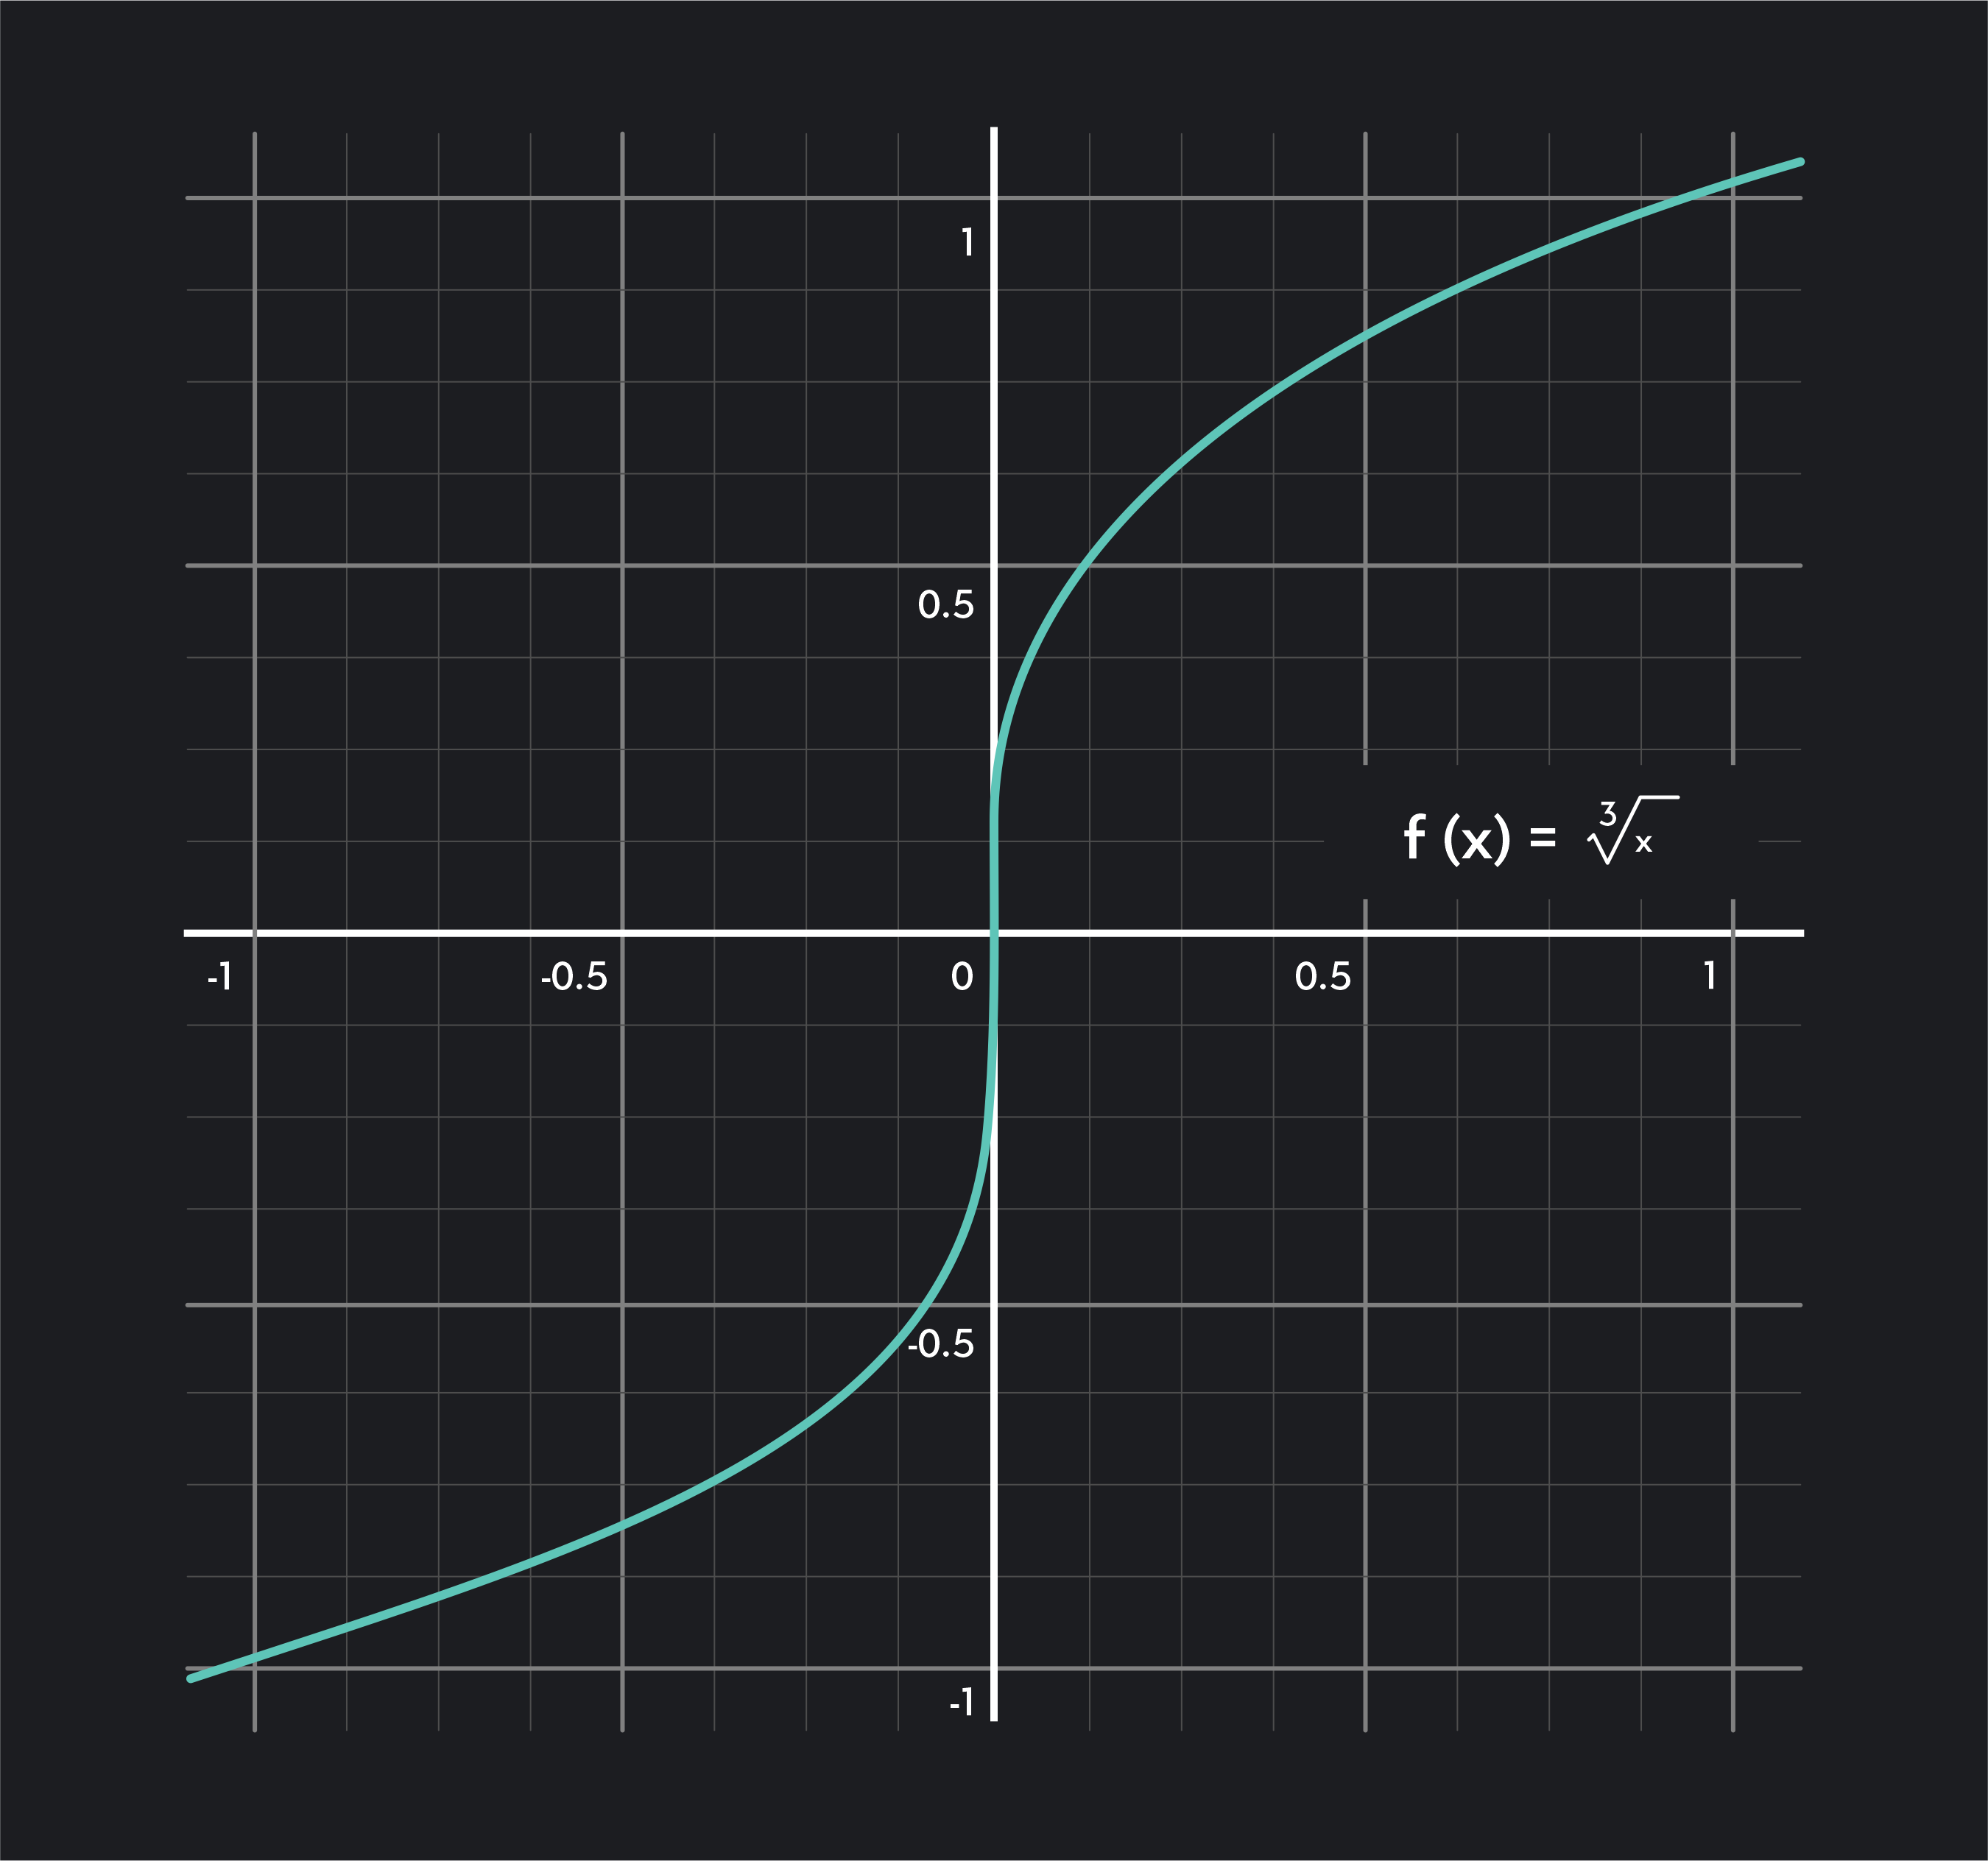 Graph showing a vertical tangent where the slope of the tangent line approaches infinity